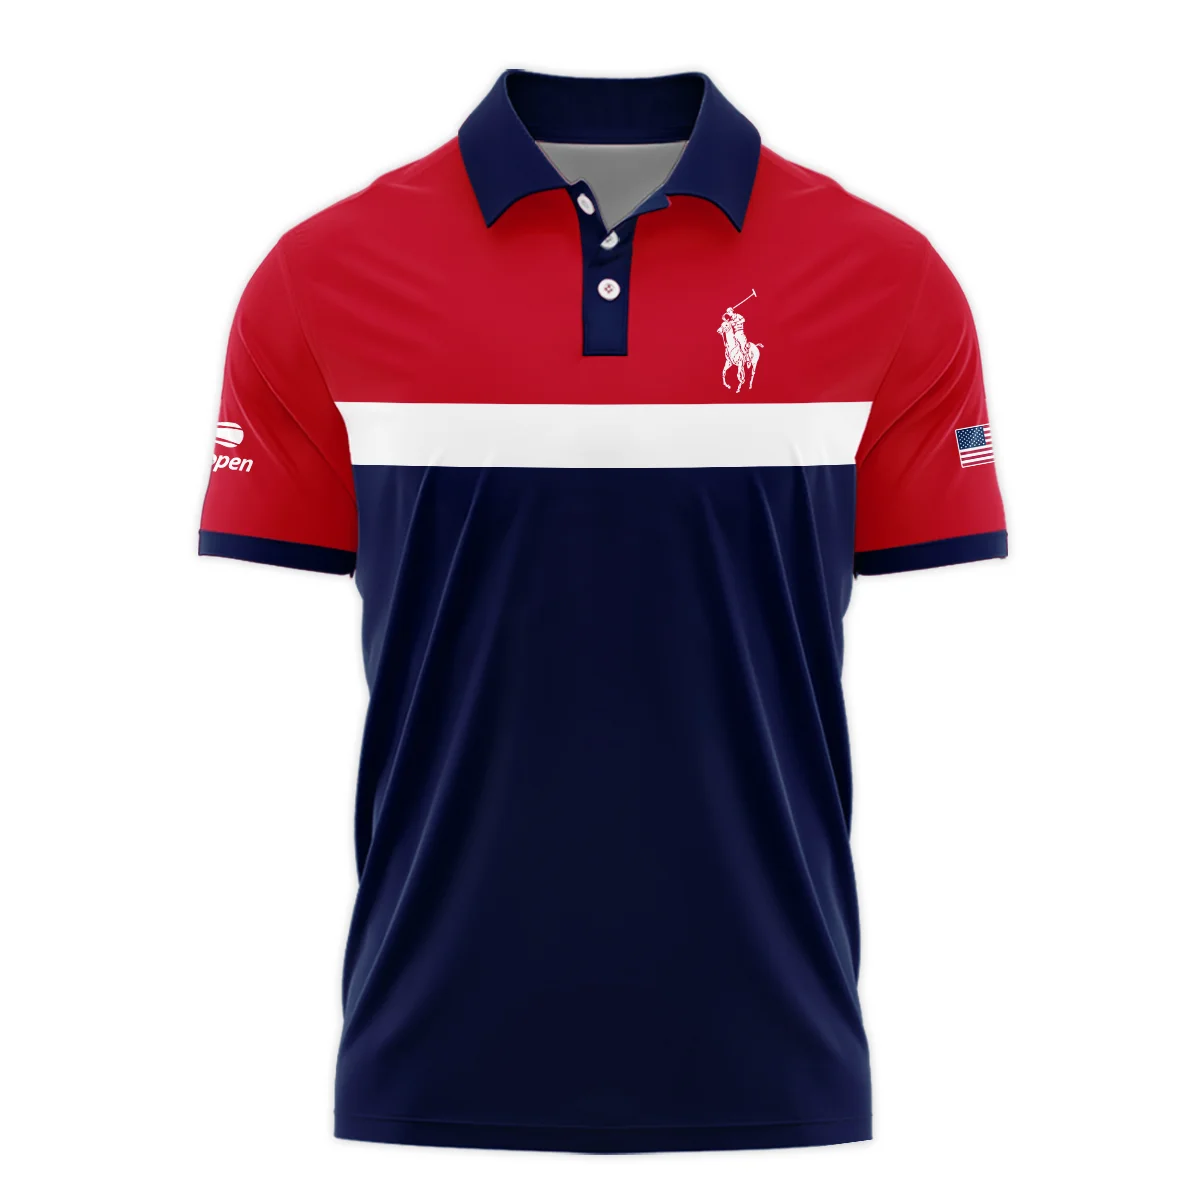 Ralph Lauren Blue Red White Background US Open Tennis Champions Vneck Polo Shirt Style Classic Polo Shirt For Men